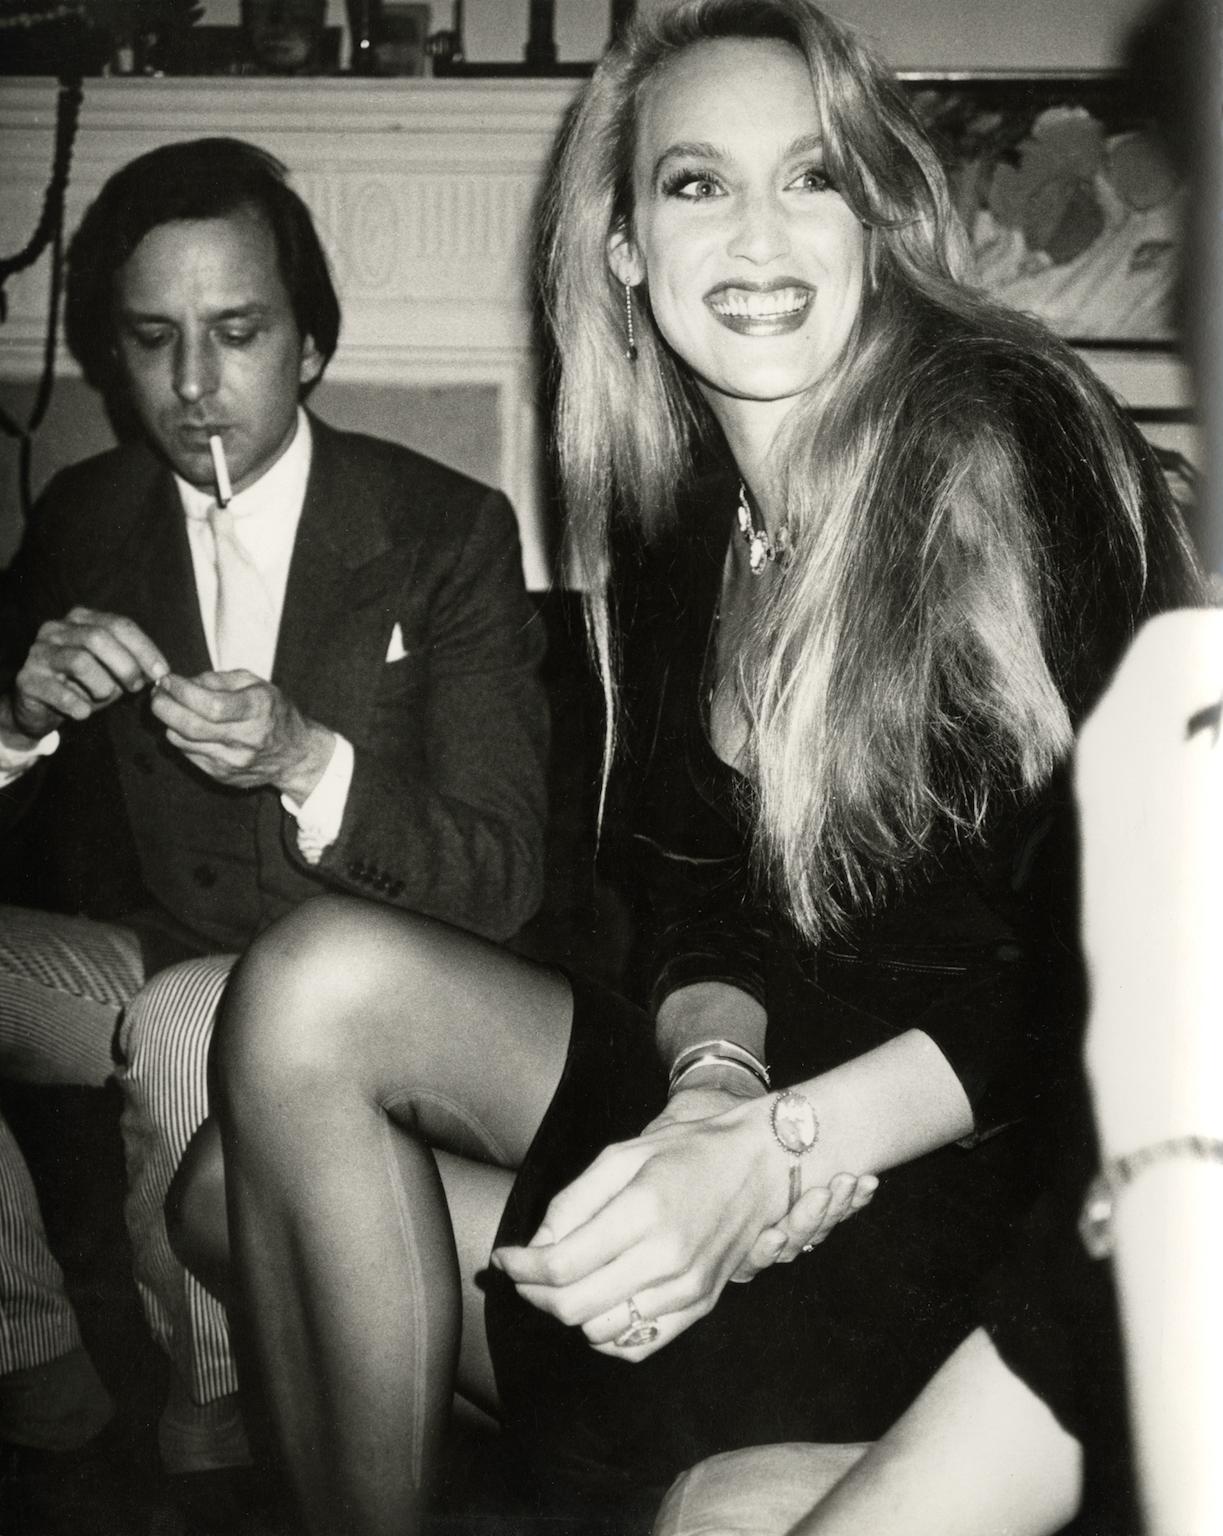 Fred Hughes and Jerry Hall